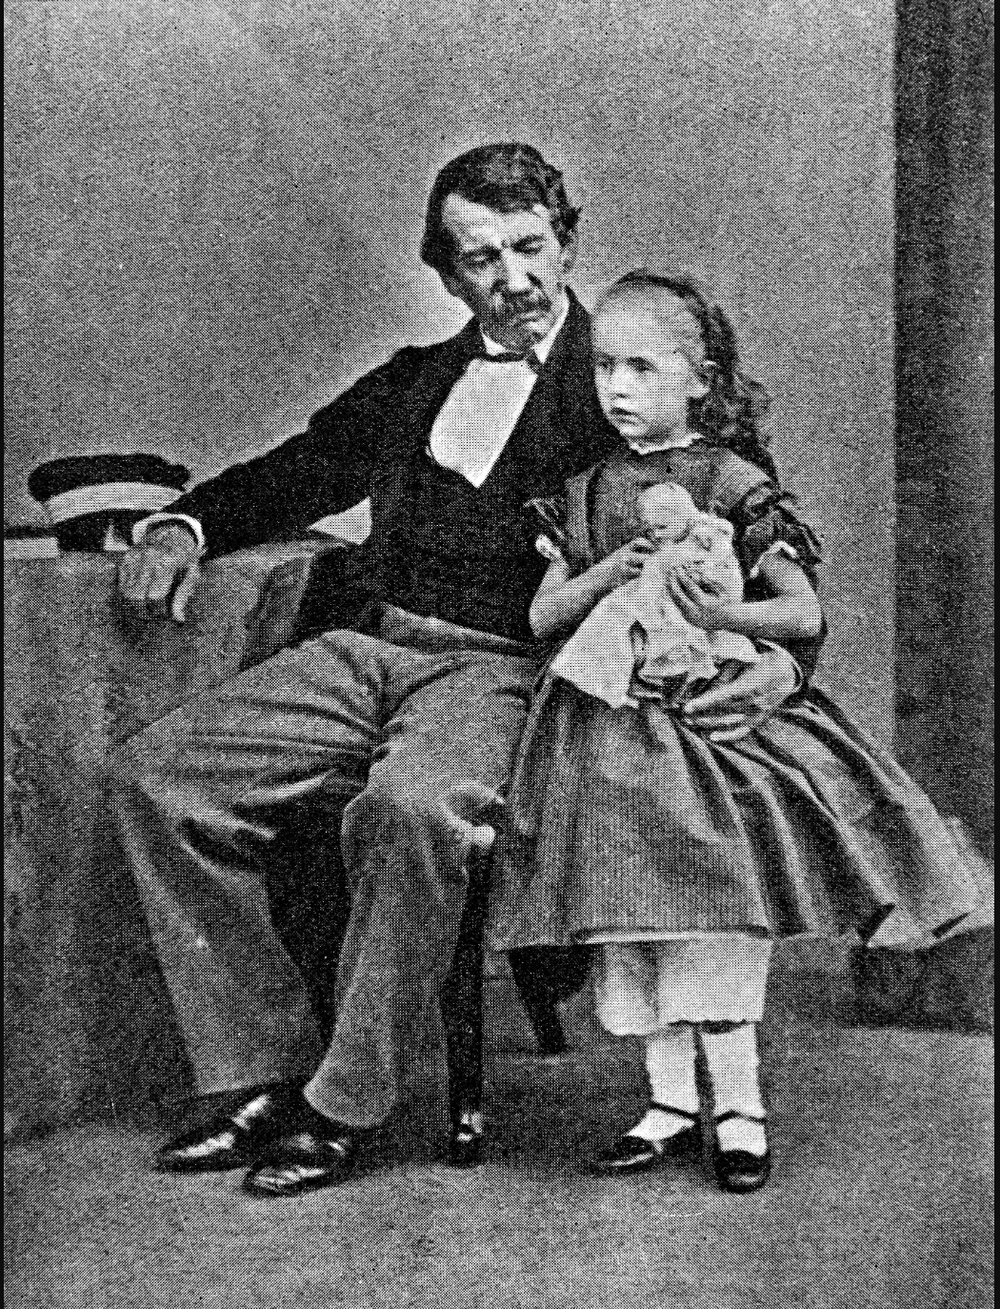 Livingstone with his daughter